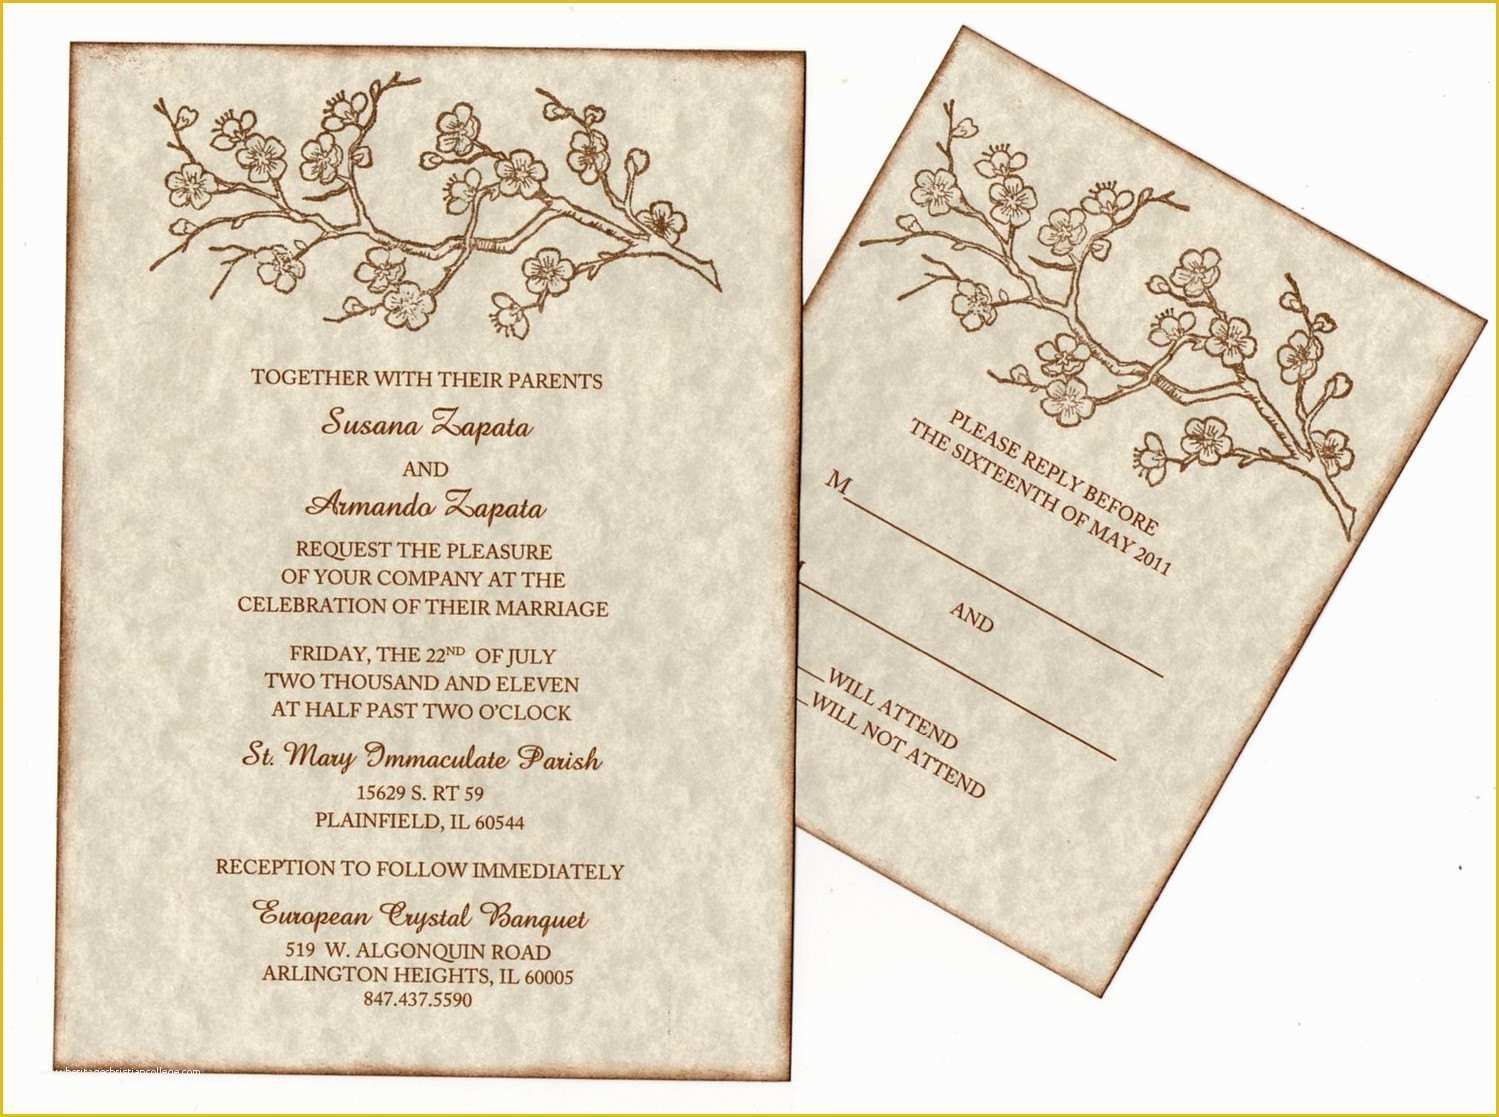 Email Indian Wedding Invitation Templates Free Of Wedding Invitation Wording Hindu Wedding Invitation